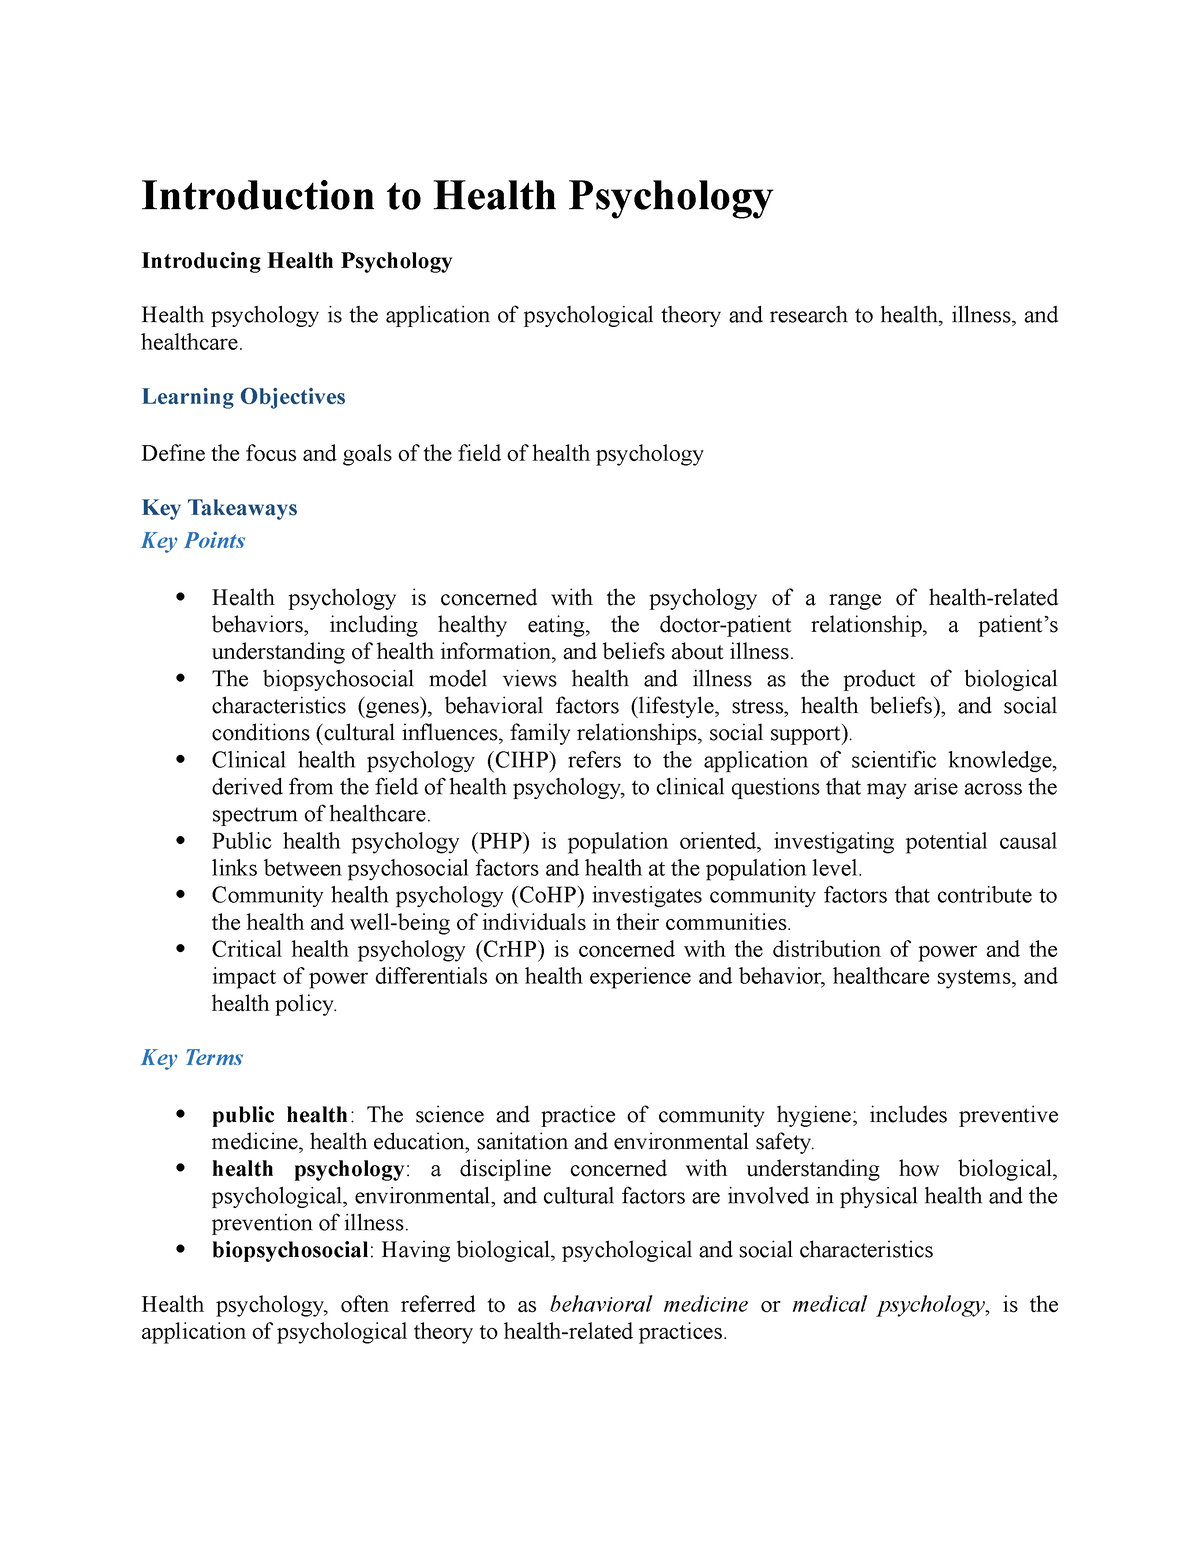 assignment of health psychology